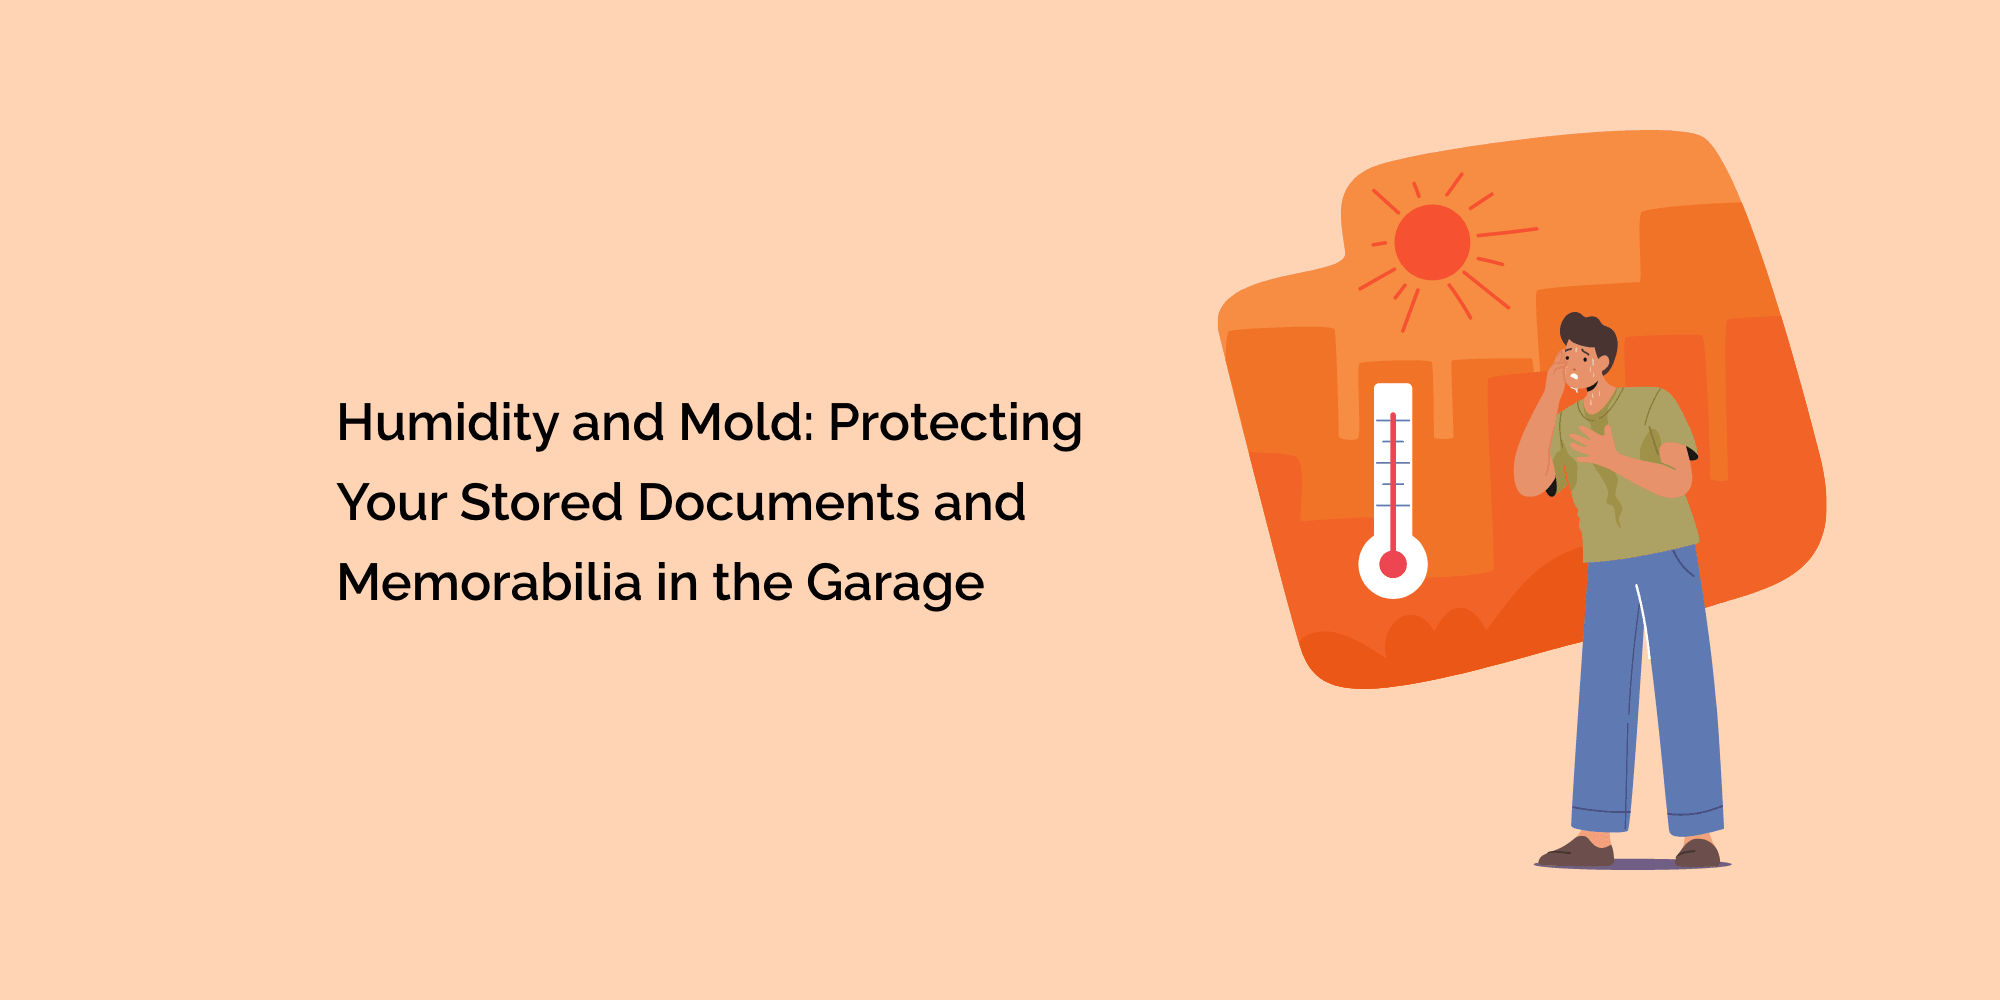 Humidity and Mold: Protecting Your Stored Documents and Memorabilia in the Garage